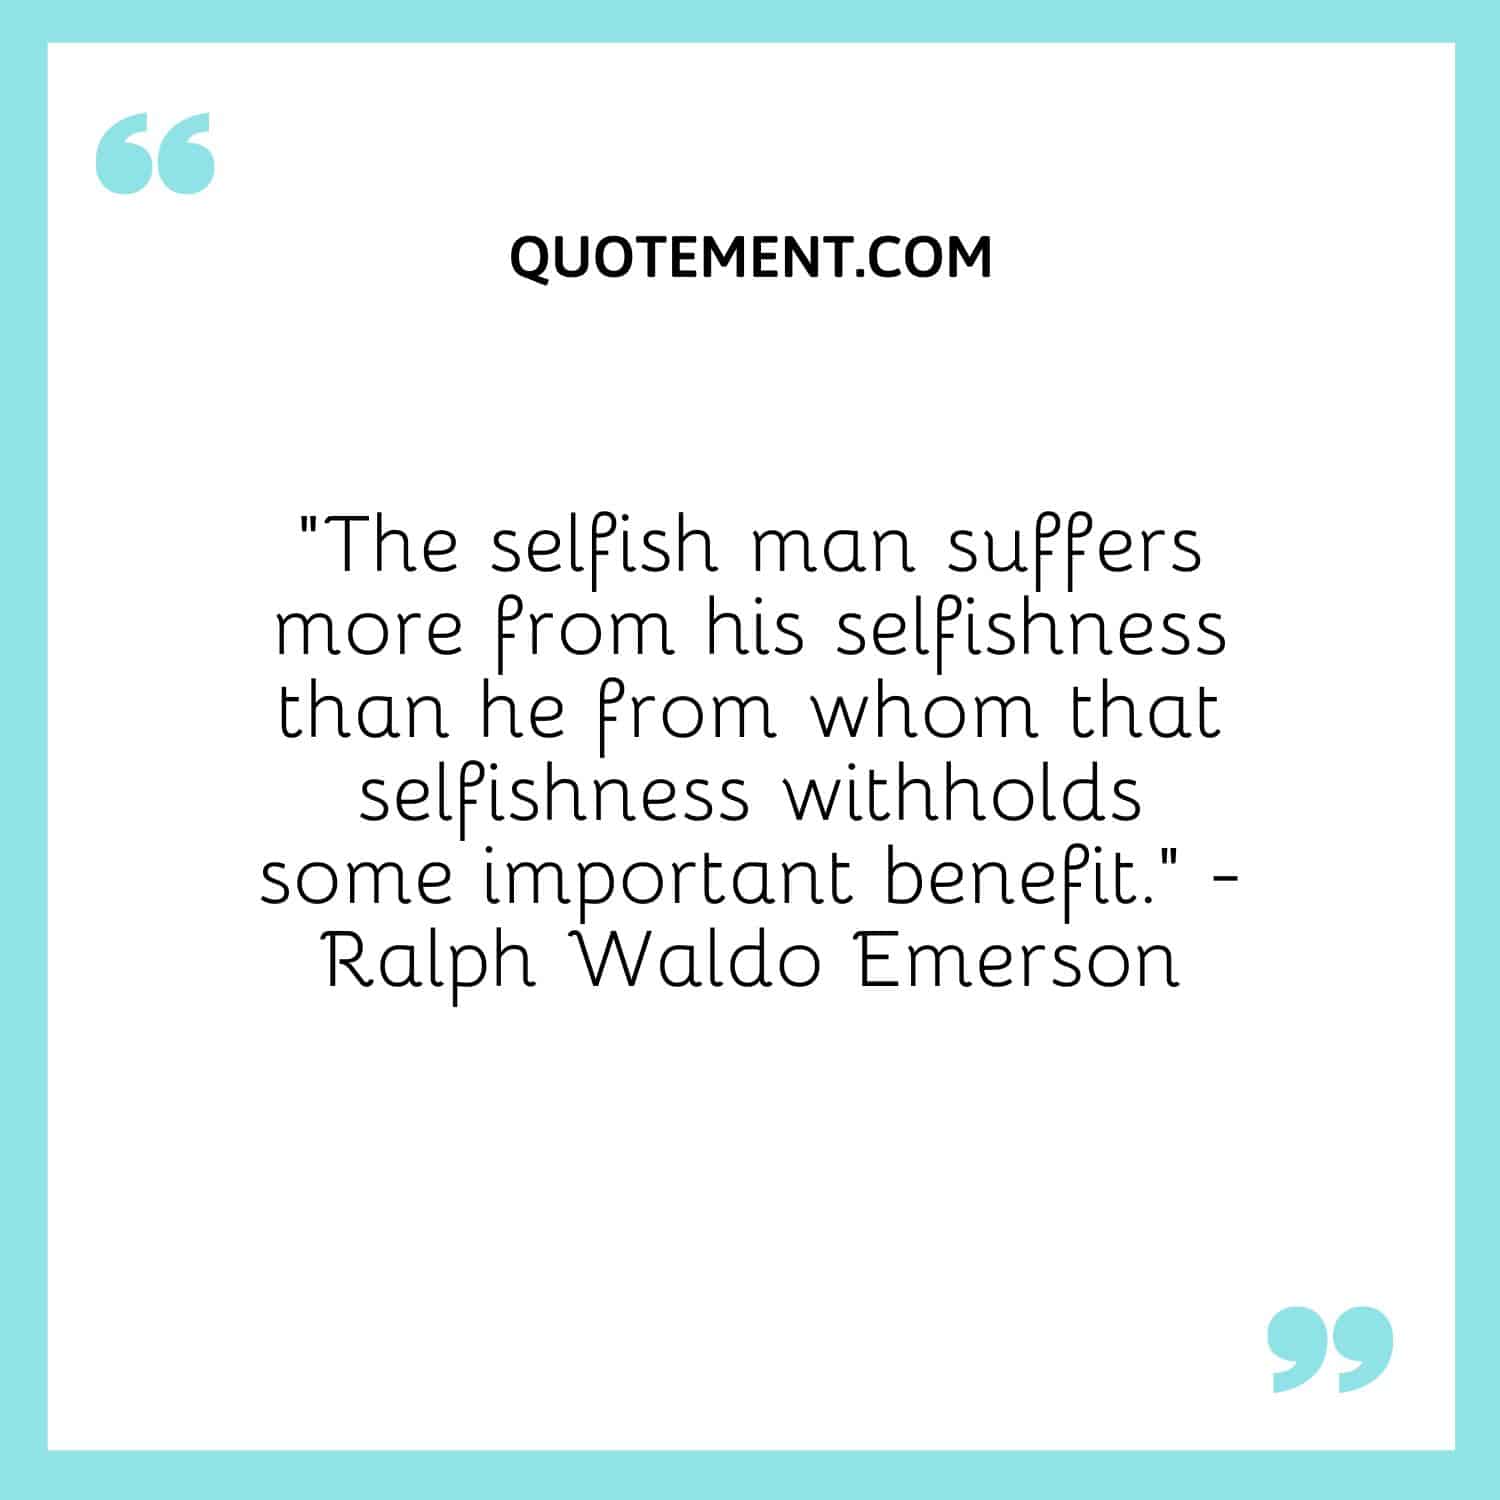 The selfish man suffers more from his selfishness